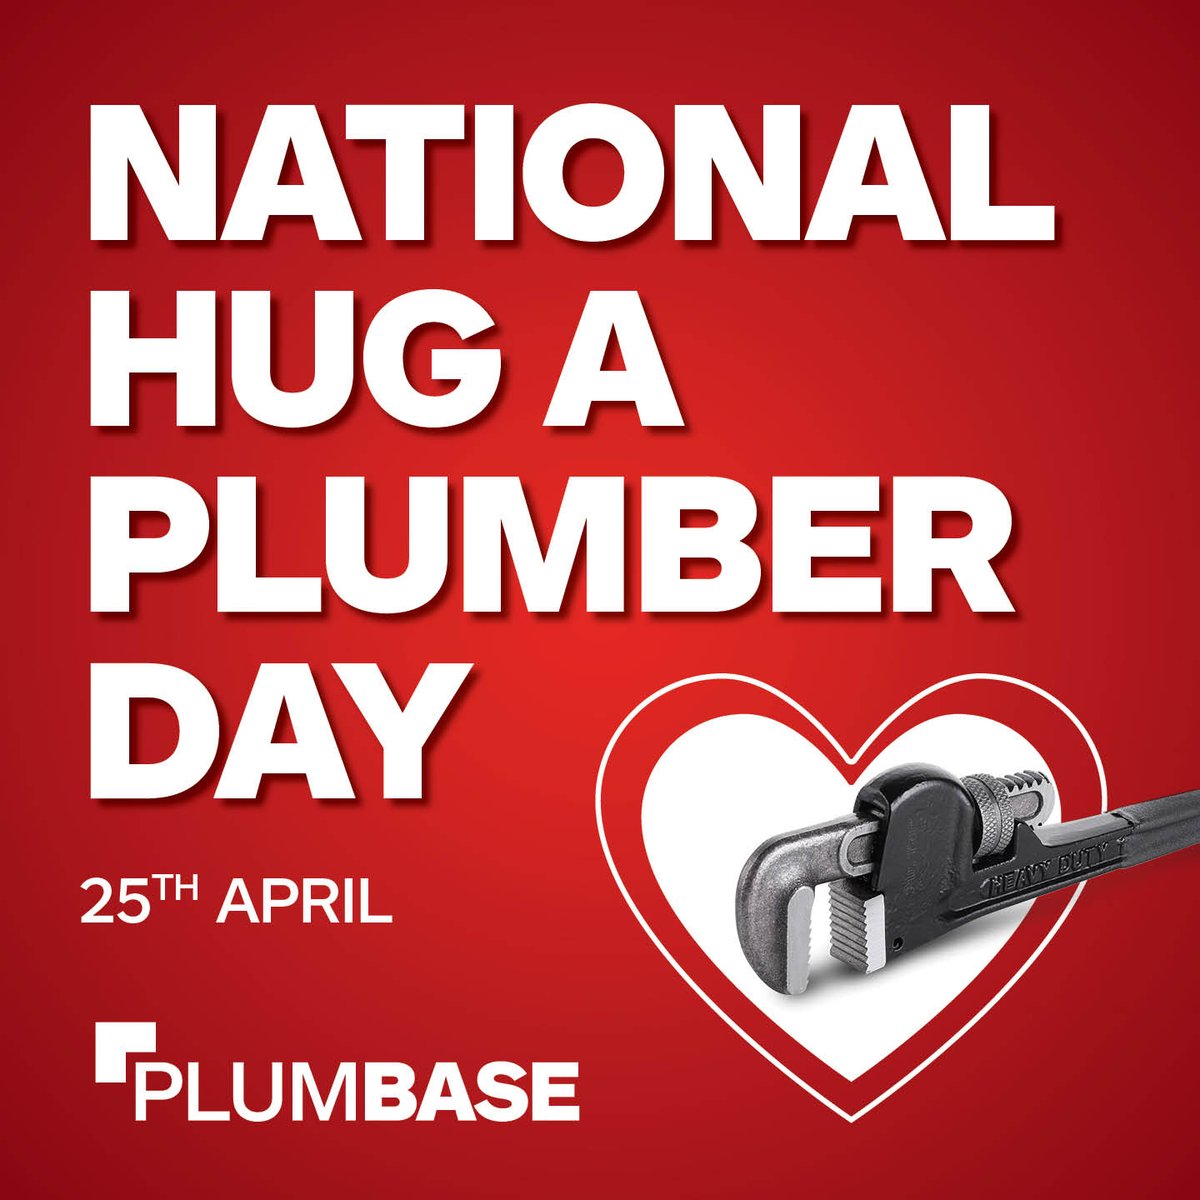 Happy Hug a Plumber Day 🛠️ Let's show some love and appreciation to all the amazing plumbers out there who keep our water flowing and our pipes working. Give your favourite plumber a big hug today and thank them for all that they do! 🚿🔧 #HugAPlumberDay #PlumberAppreciation